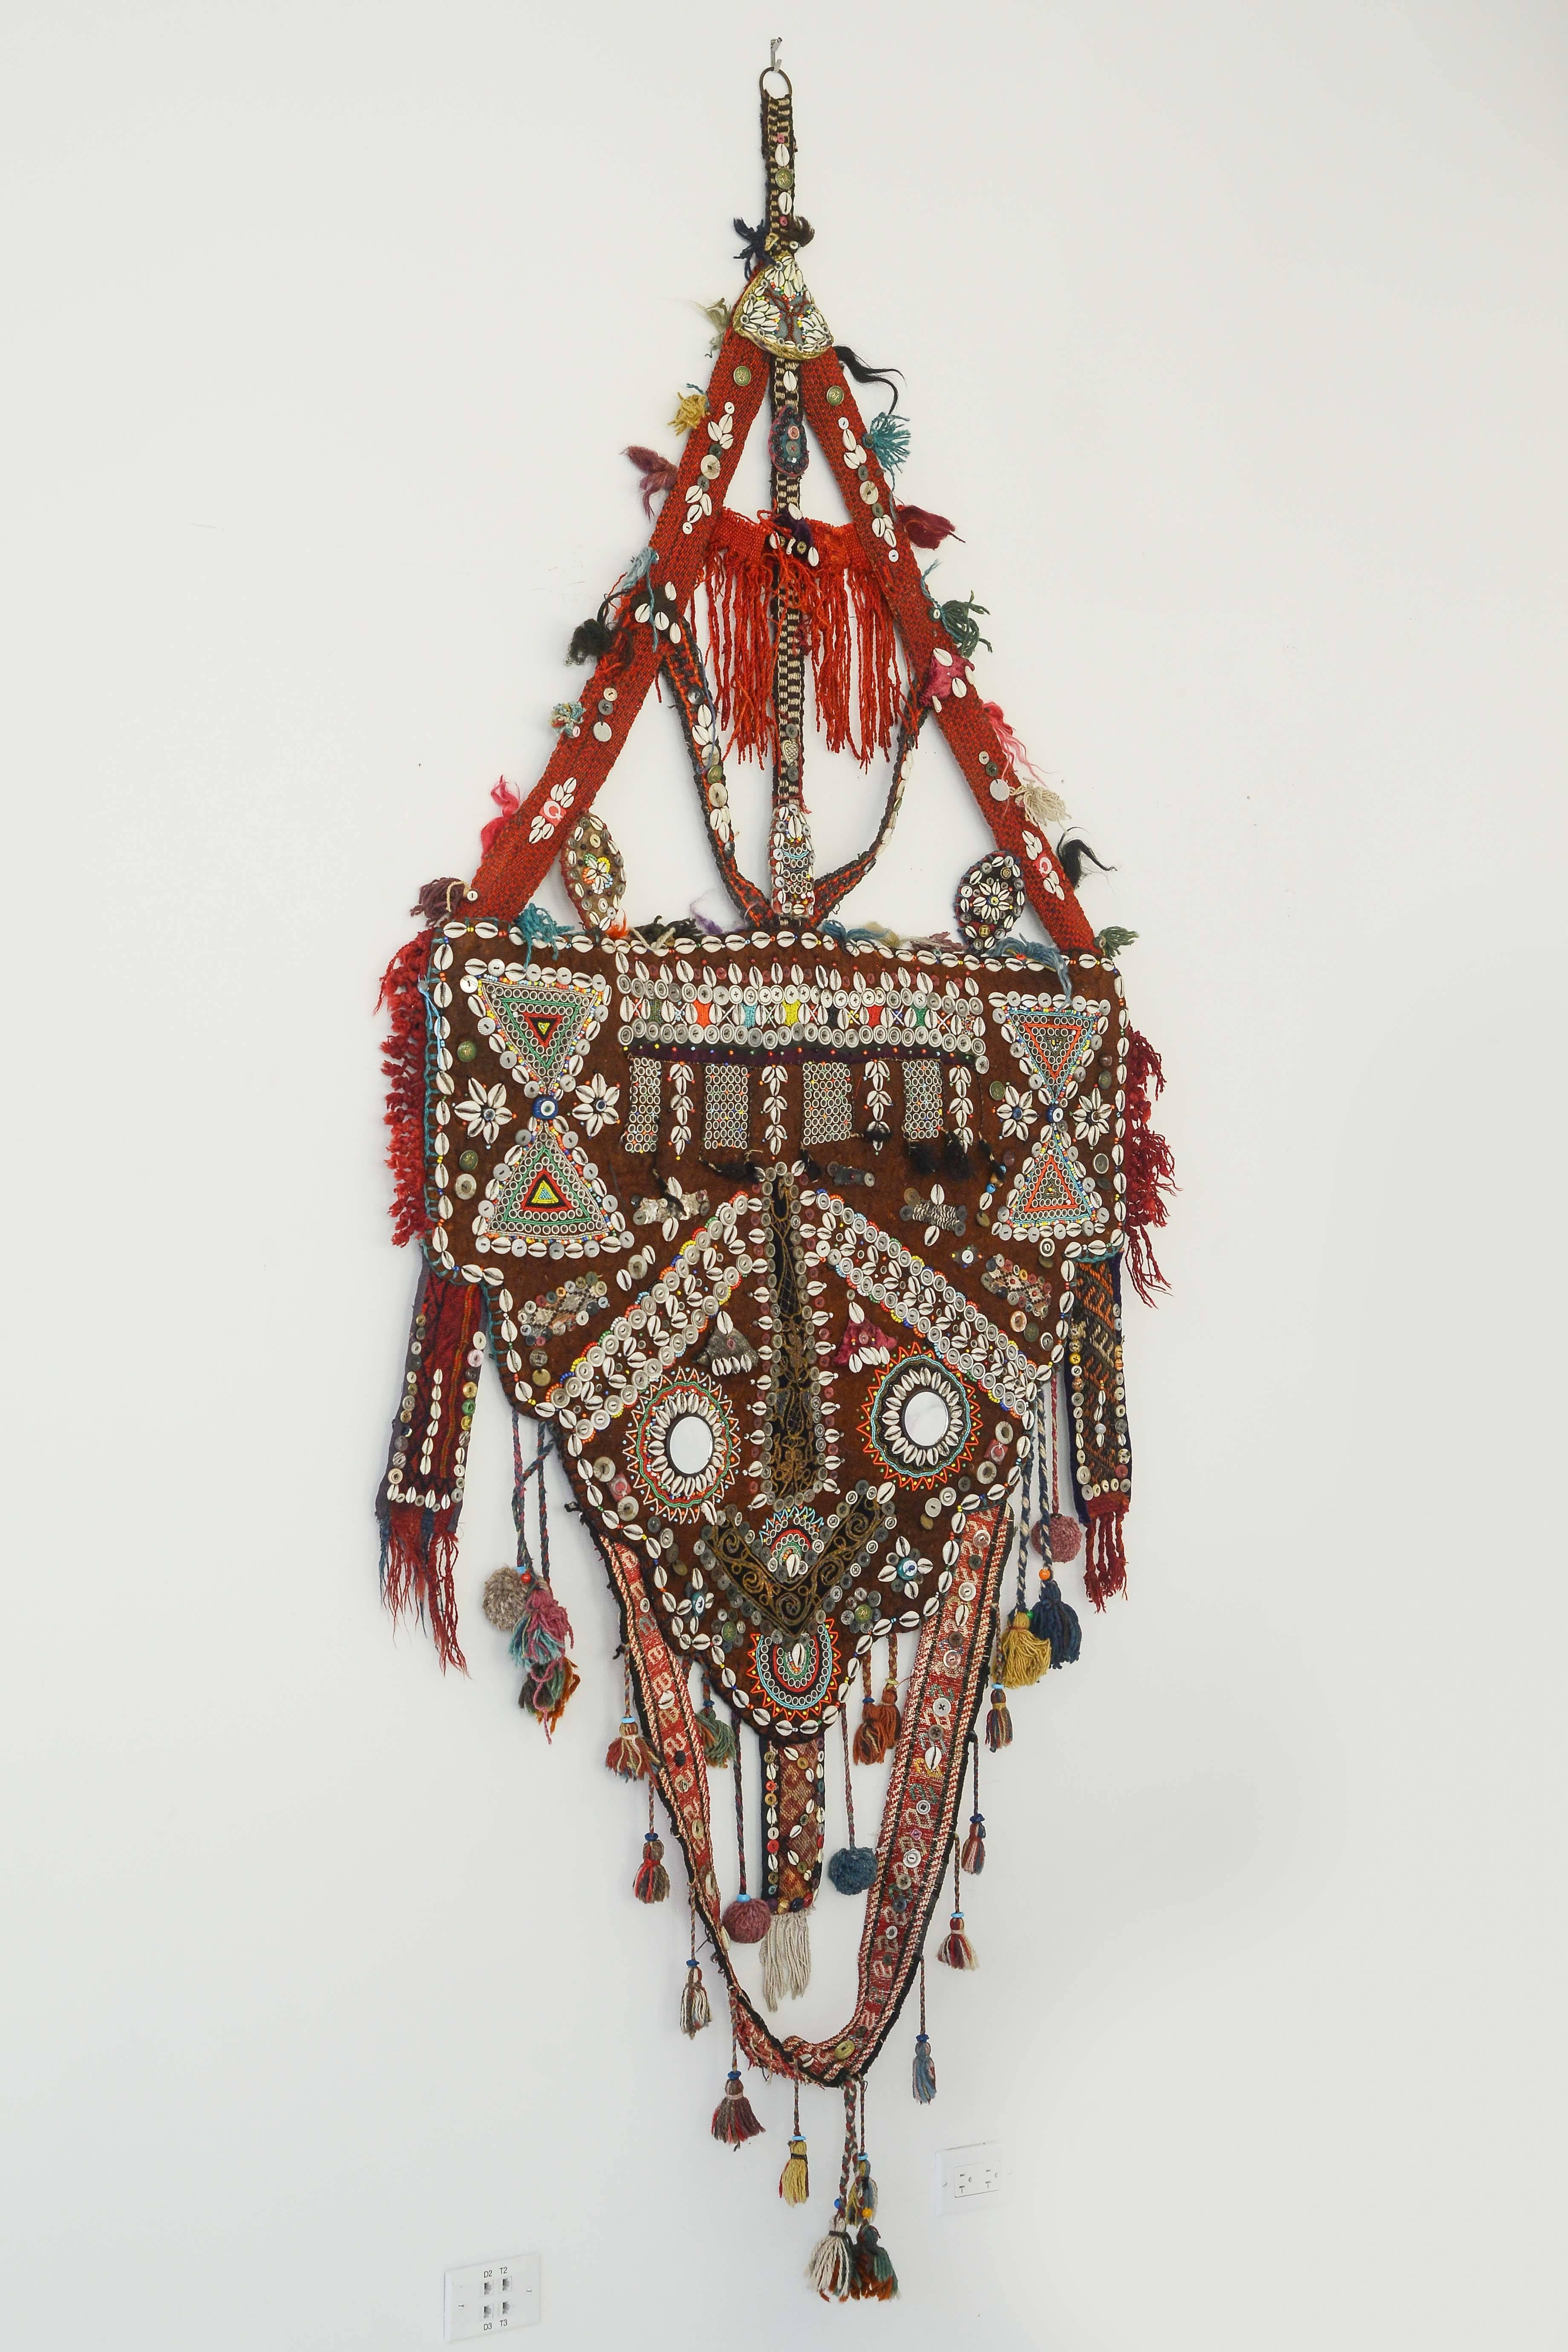 This highly decorative and embellished camel harness from India is amazing as a work of art! The level of detail and wow factor will add a three dimensional piece of art to any space hard to find.